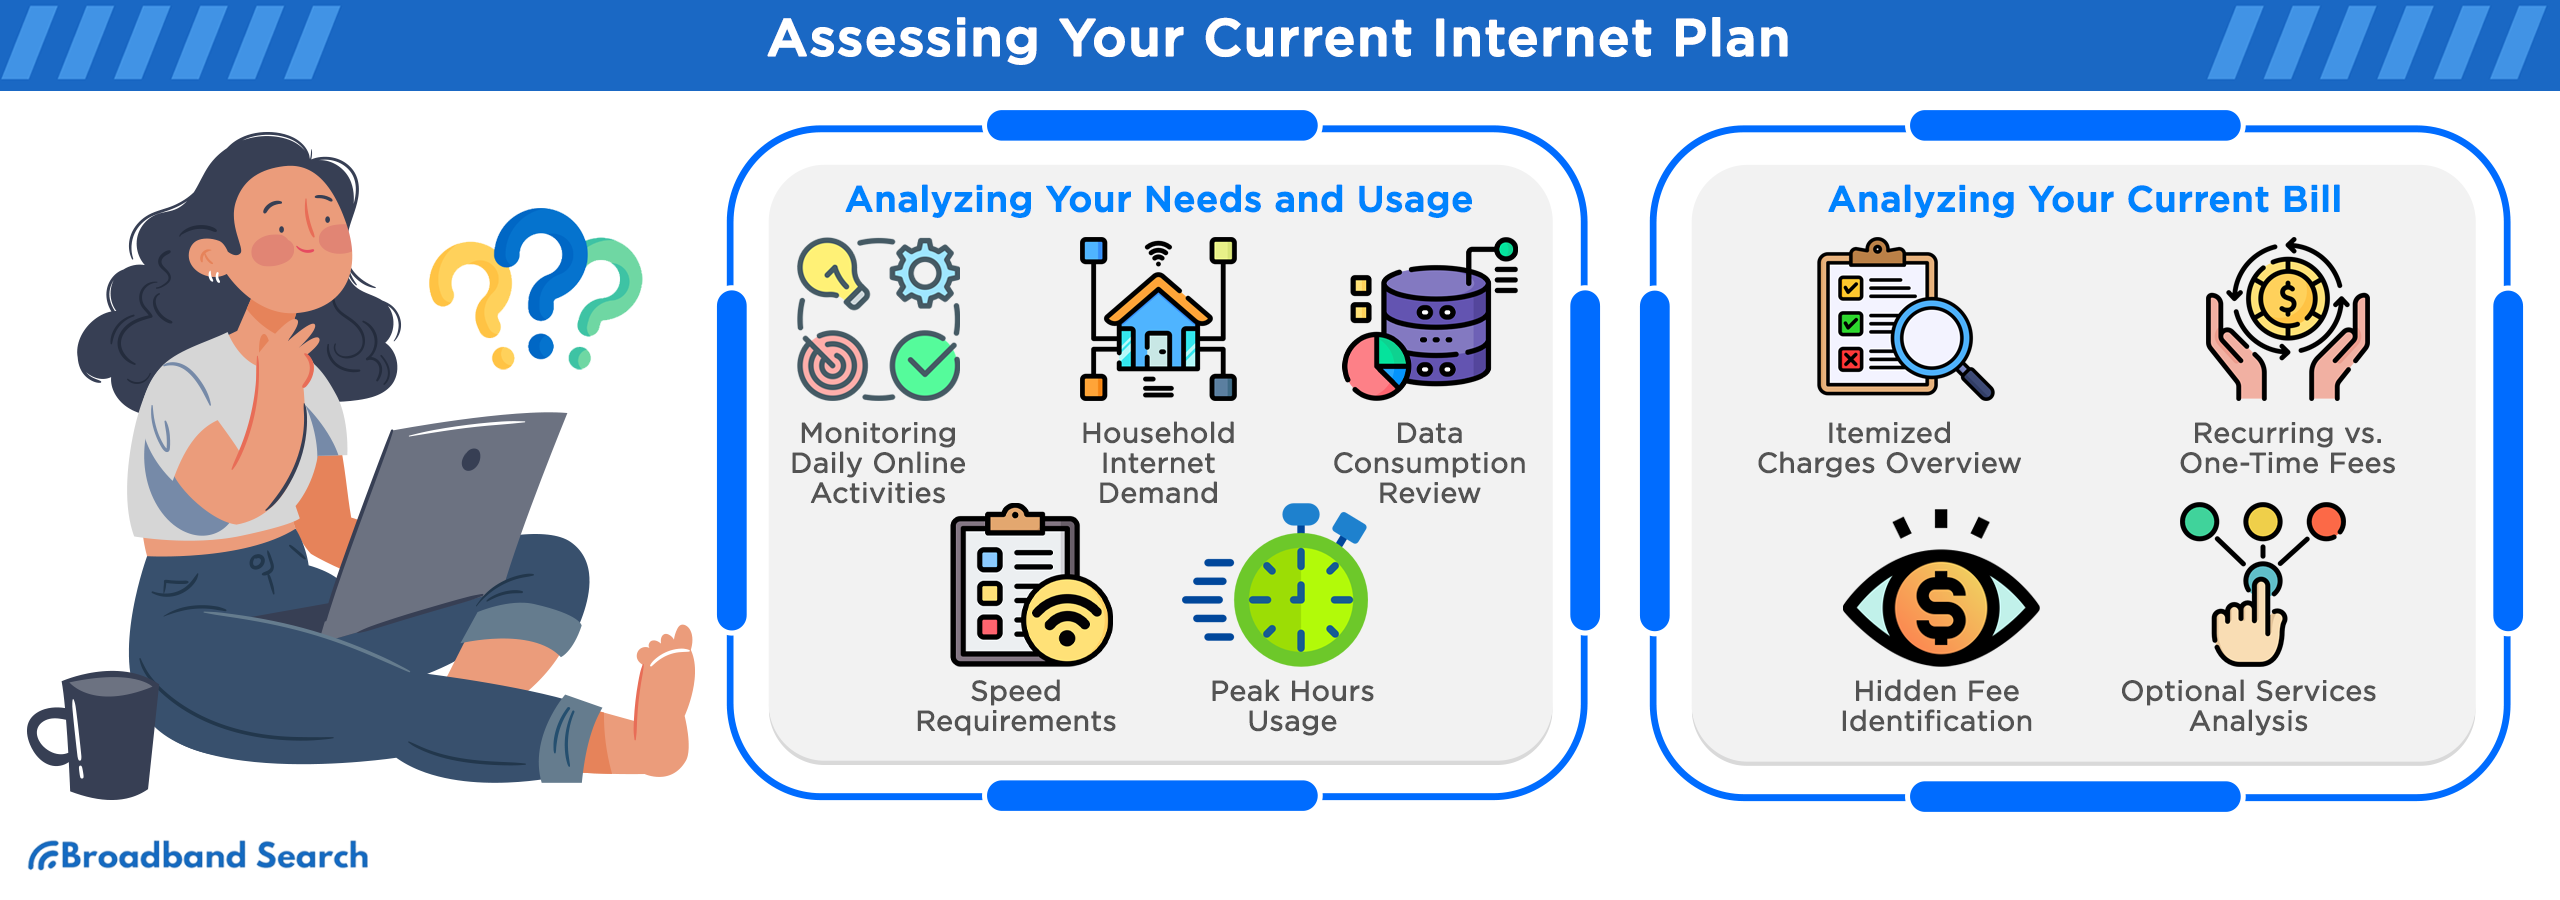 How to assess your current internet plan